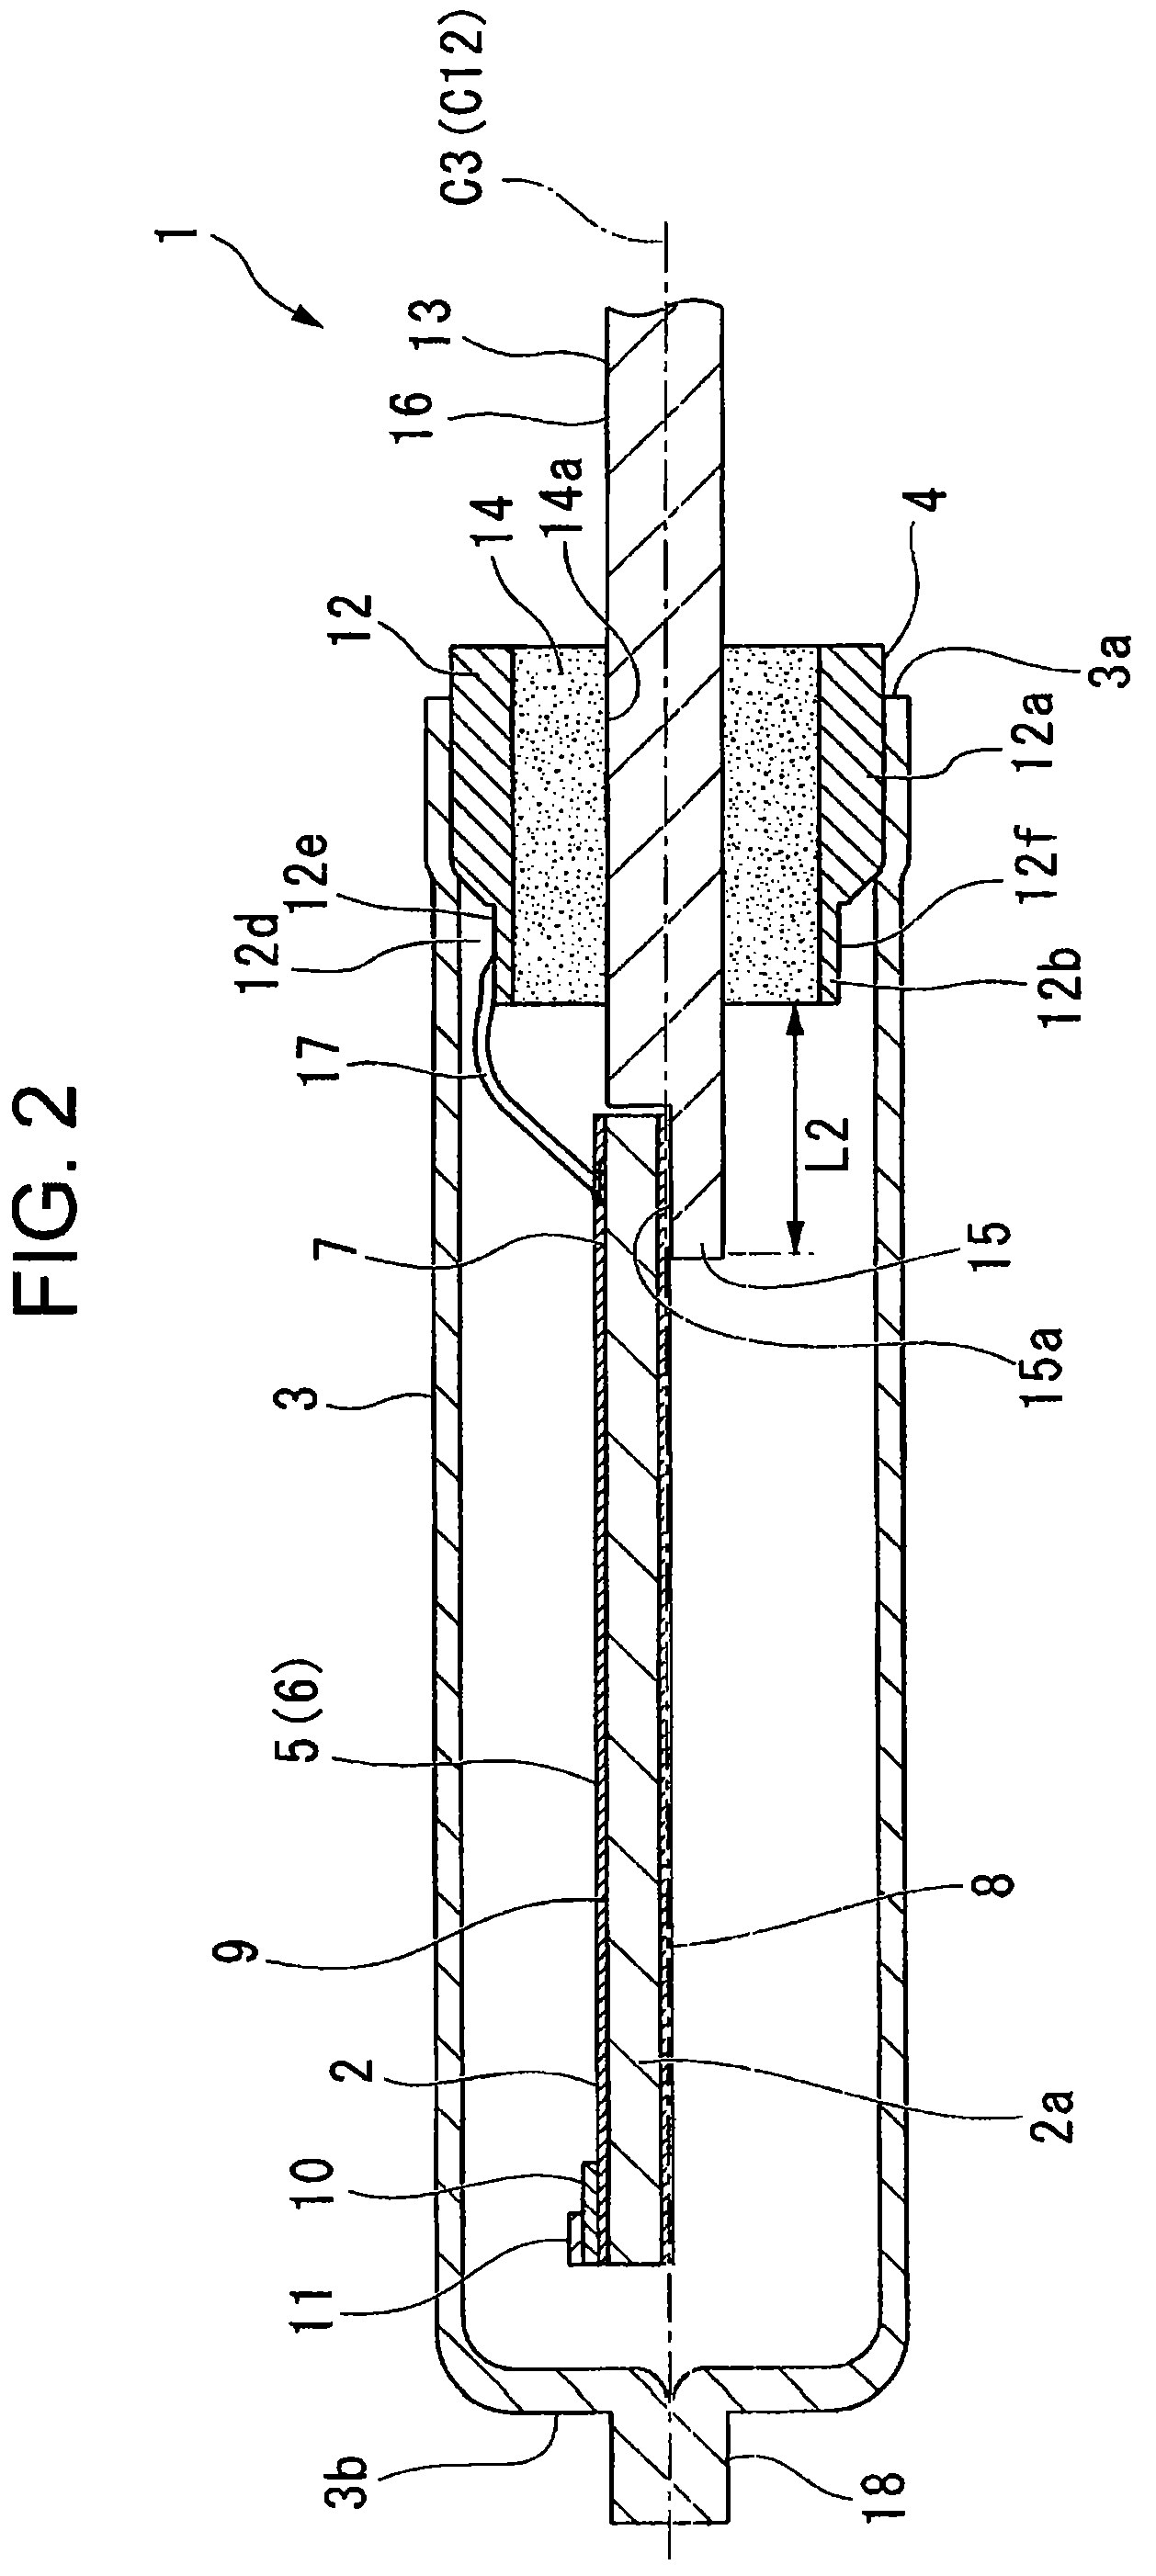 Method of fabricating hermetic terminal and hermetic terminal, method of fabricating piezoelectric oscillator and piezoelectric oscillator, oscillator, electronic appliance, and radio clock